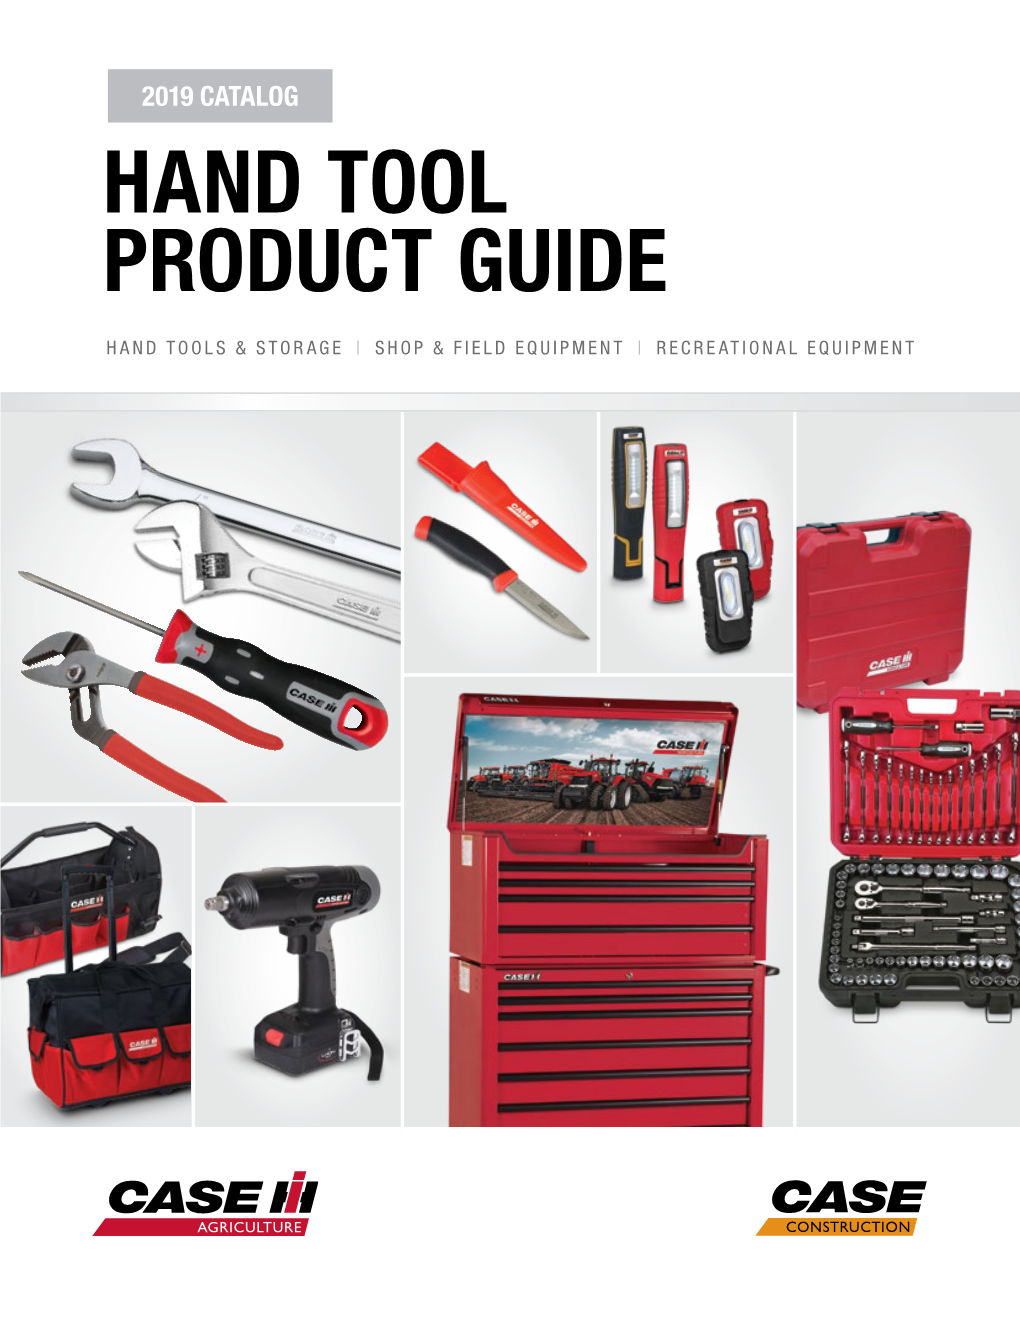 Hand Tool Product Guide